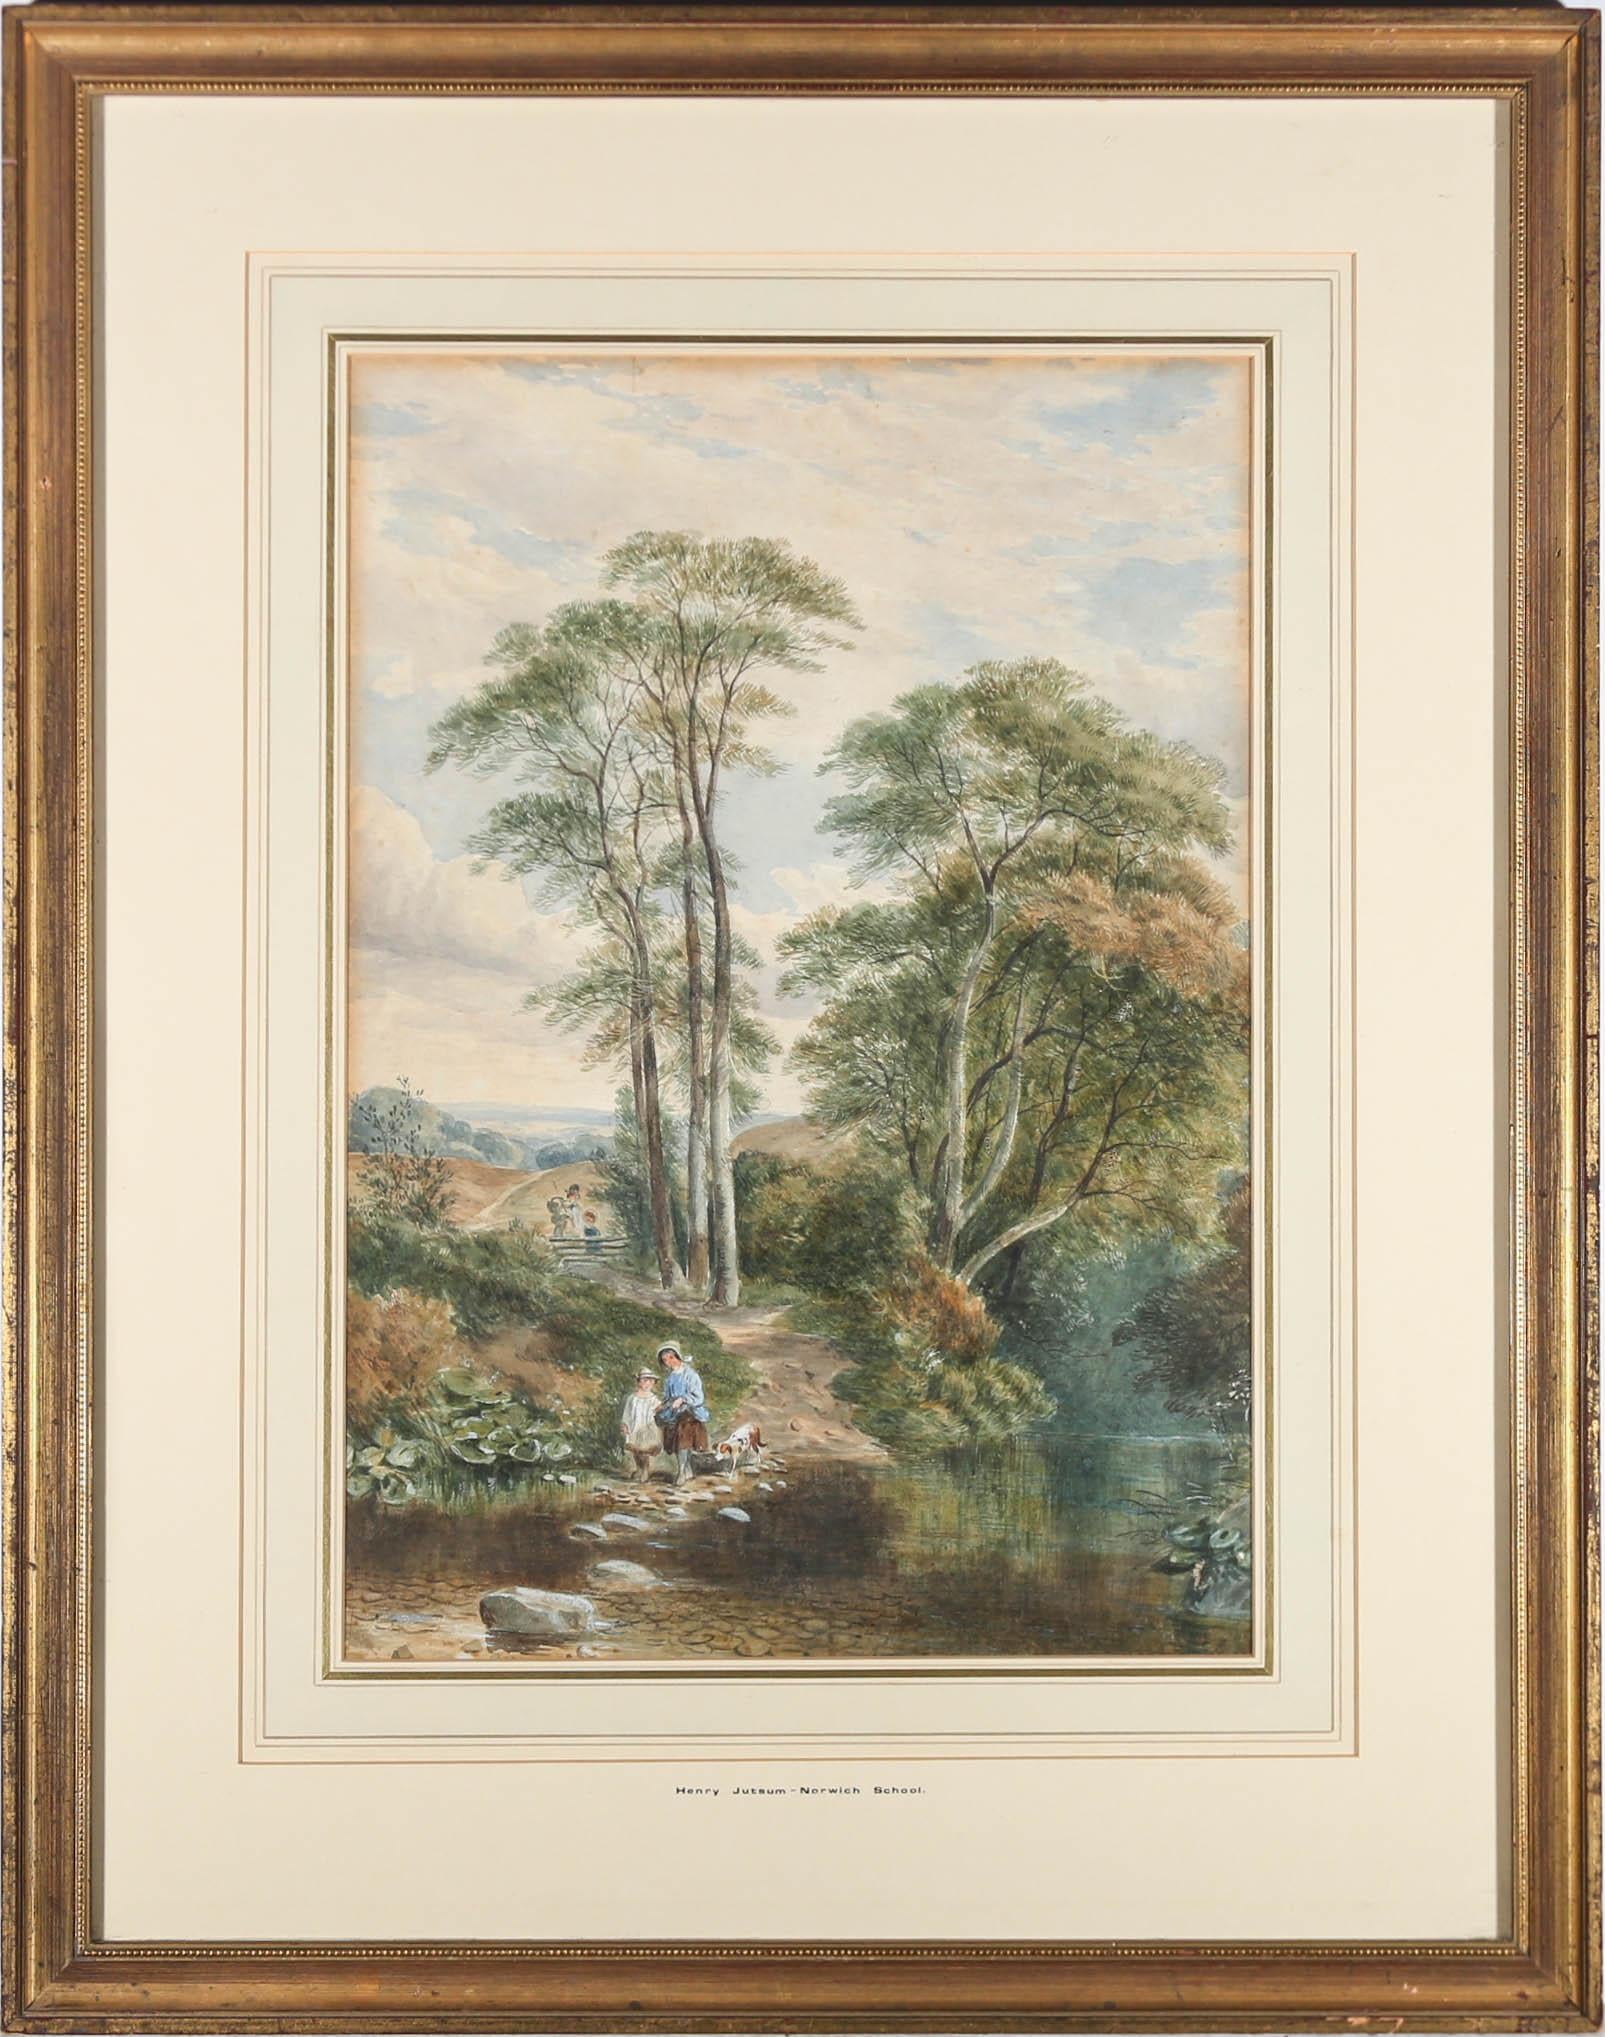 An attractive river scene painted in watercolour by 19th century artist Henry Jutsum (1816-1869). In the foreground a mother and daughter can be seen preparing to cross stepping stones with their skirts up, while father and son tackle the wooden